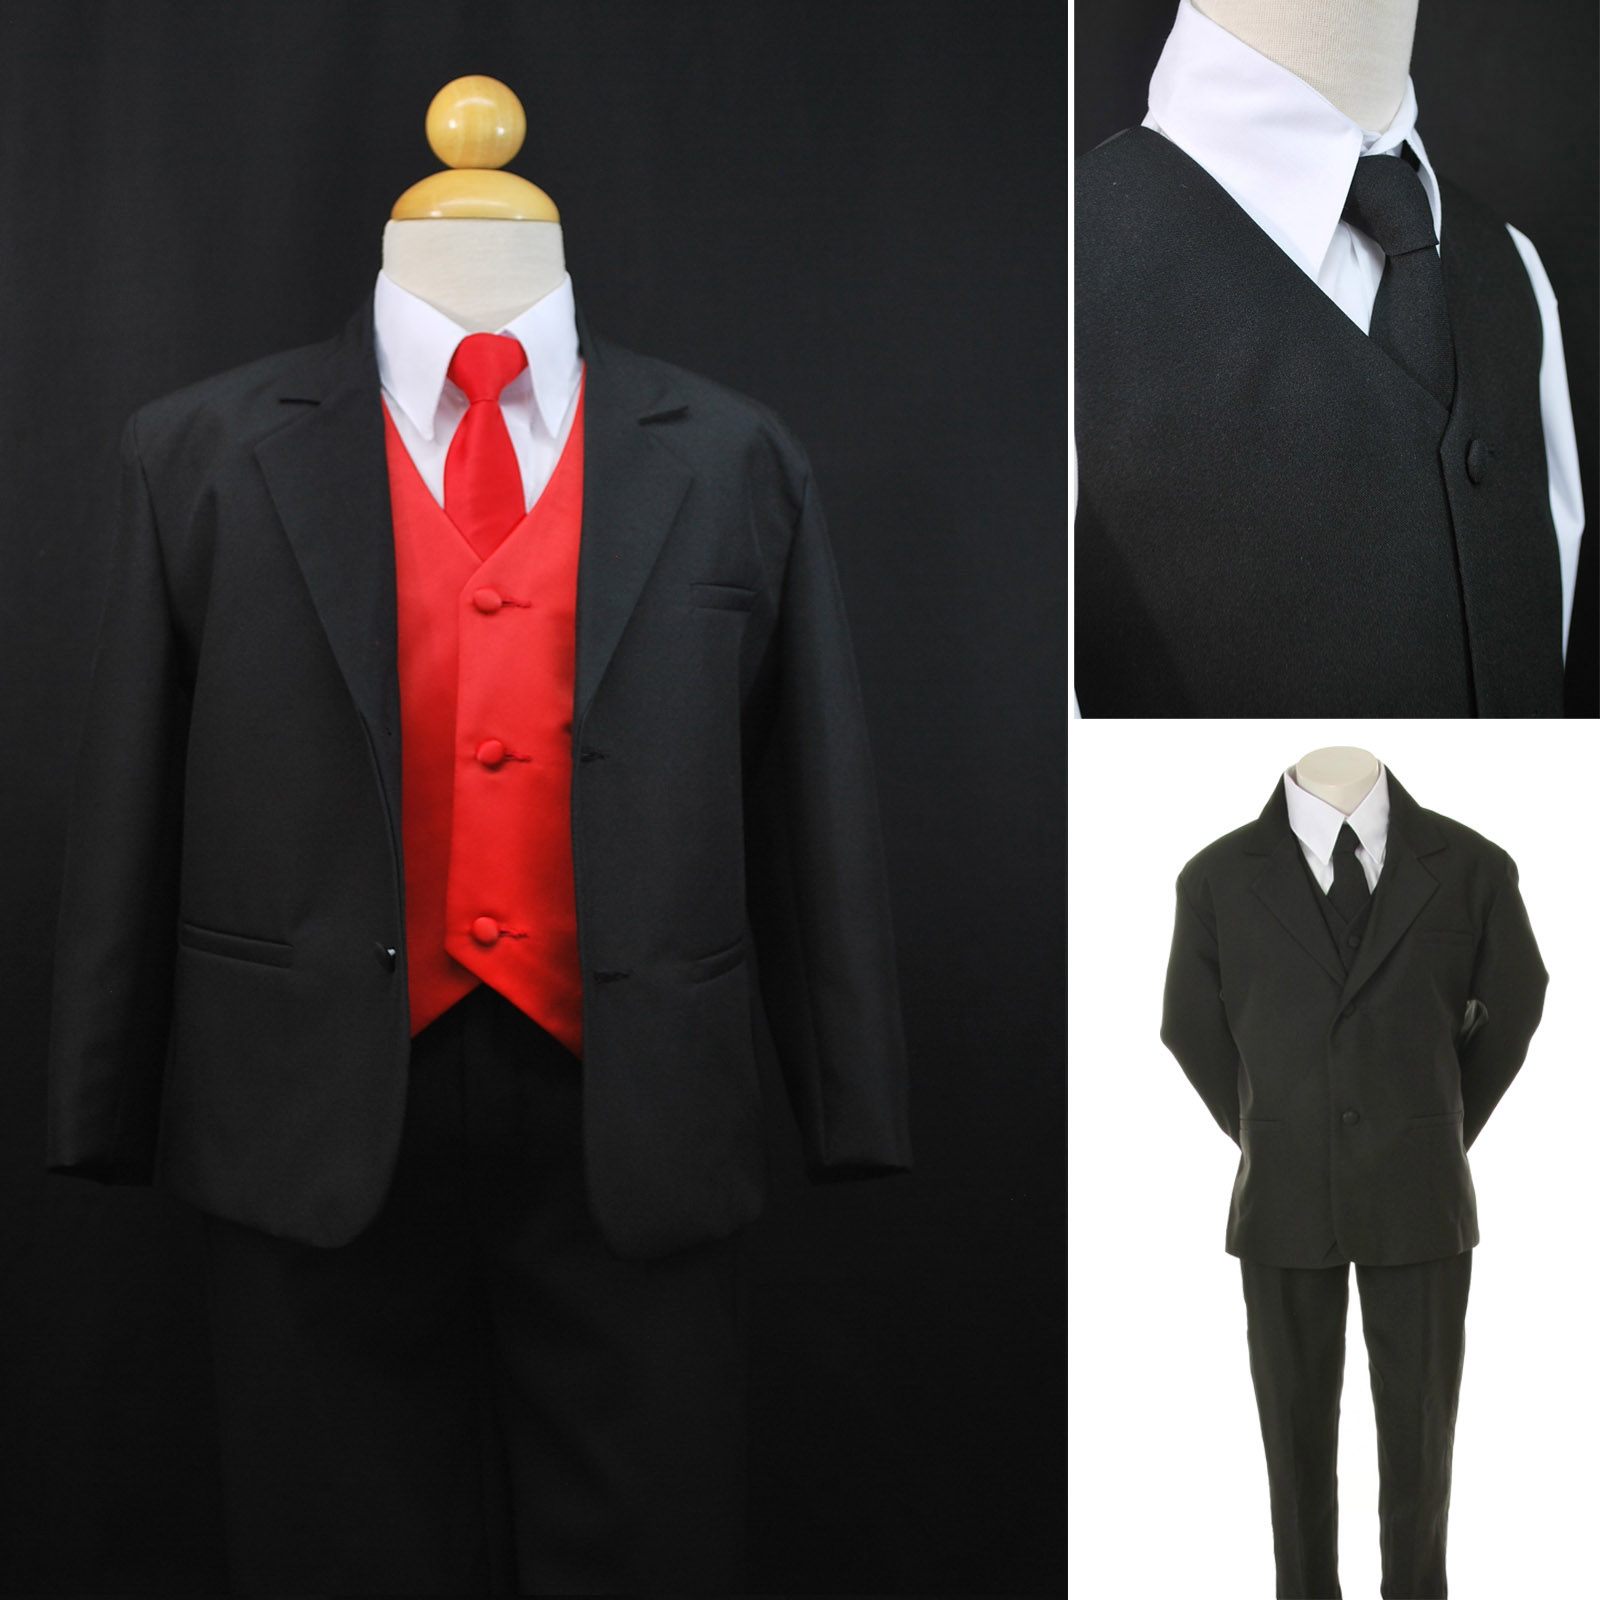 Leadertux 2T 3T 4T 7pc Set Baby Toddler Black Boy Suit Tuxedo + Red Tie & Vest Wedding Party Holiday Formal Outfit